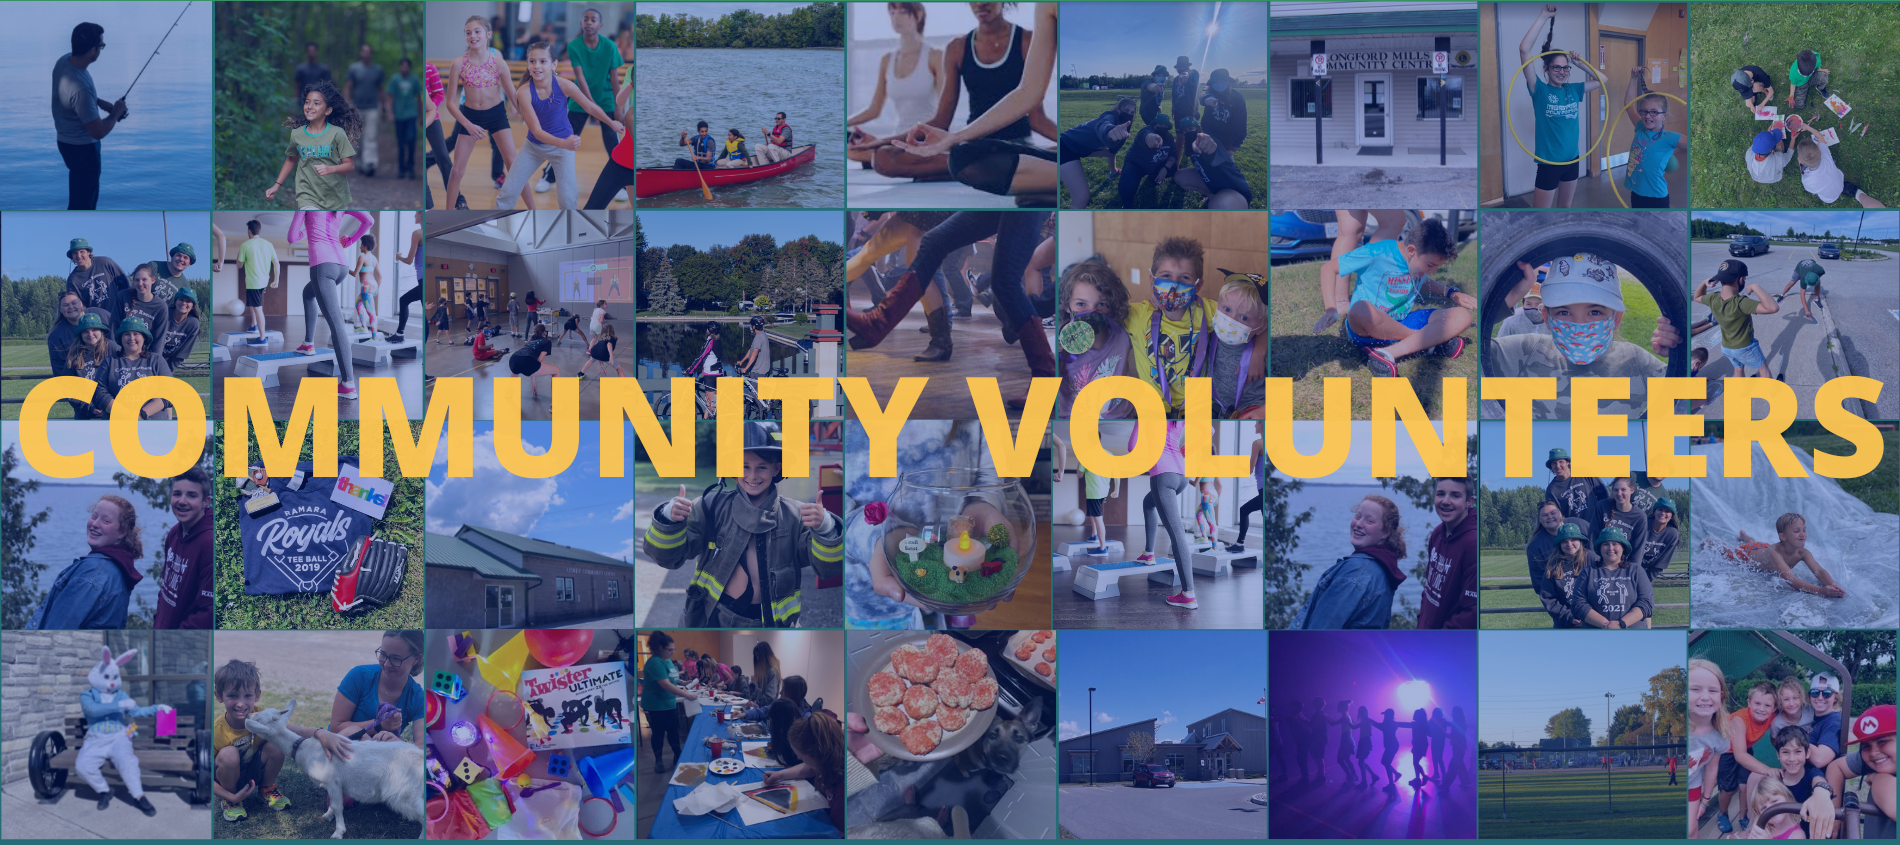 collages of programs with the caption "COMMUNITY VOLUNTEERS"